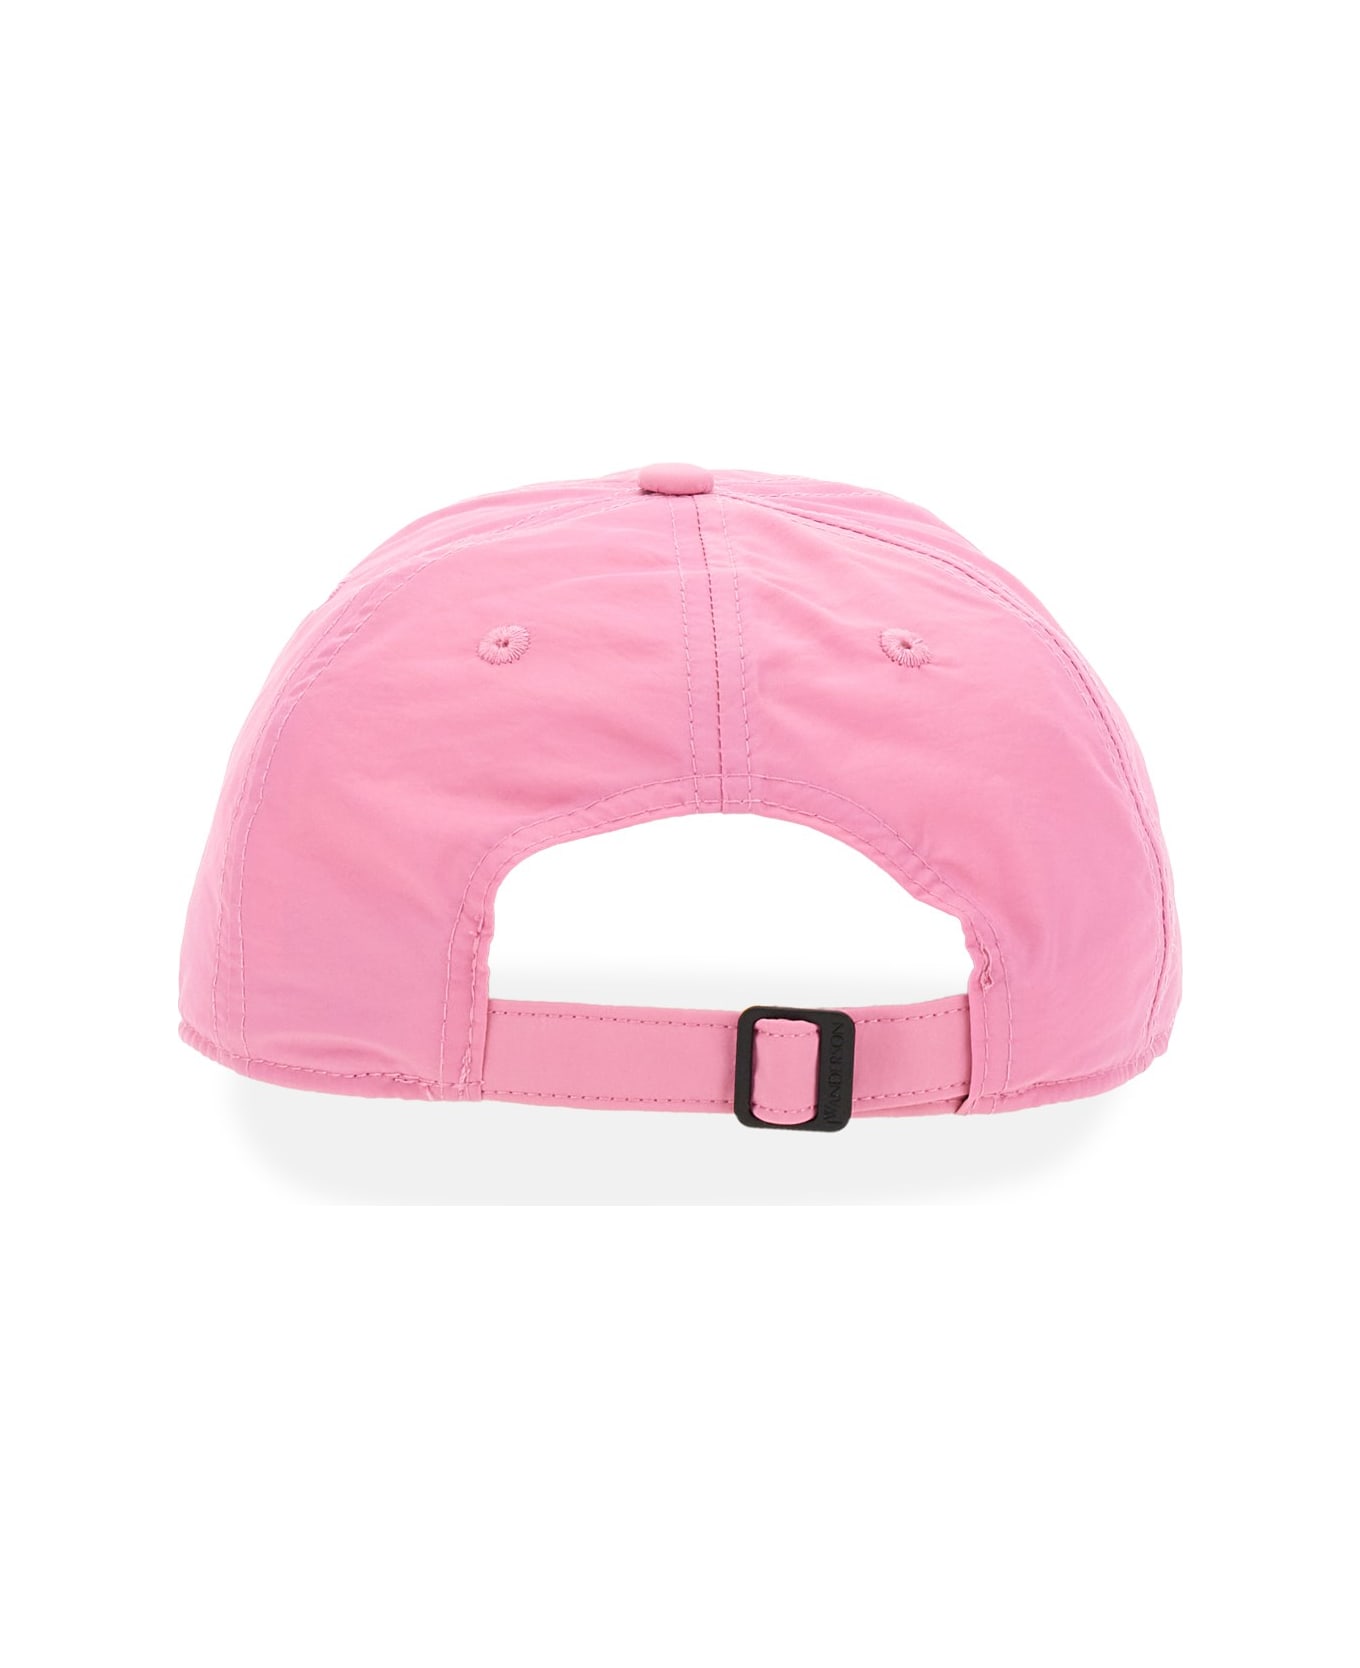 J.W. Anderson Baseball Hat With Logo Embroidery - PINK